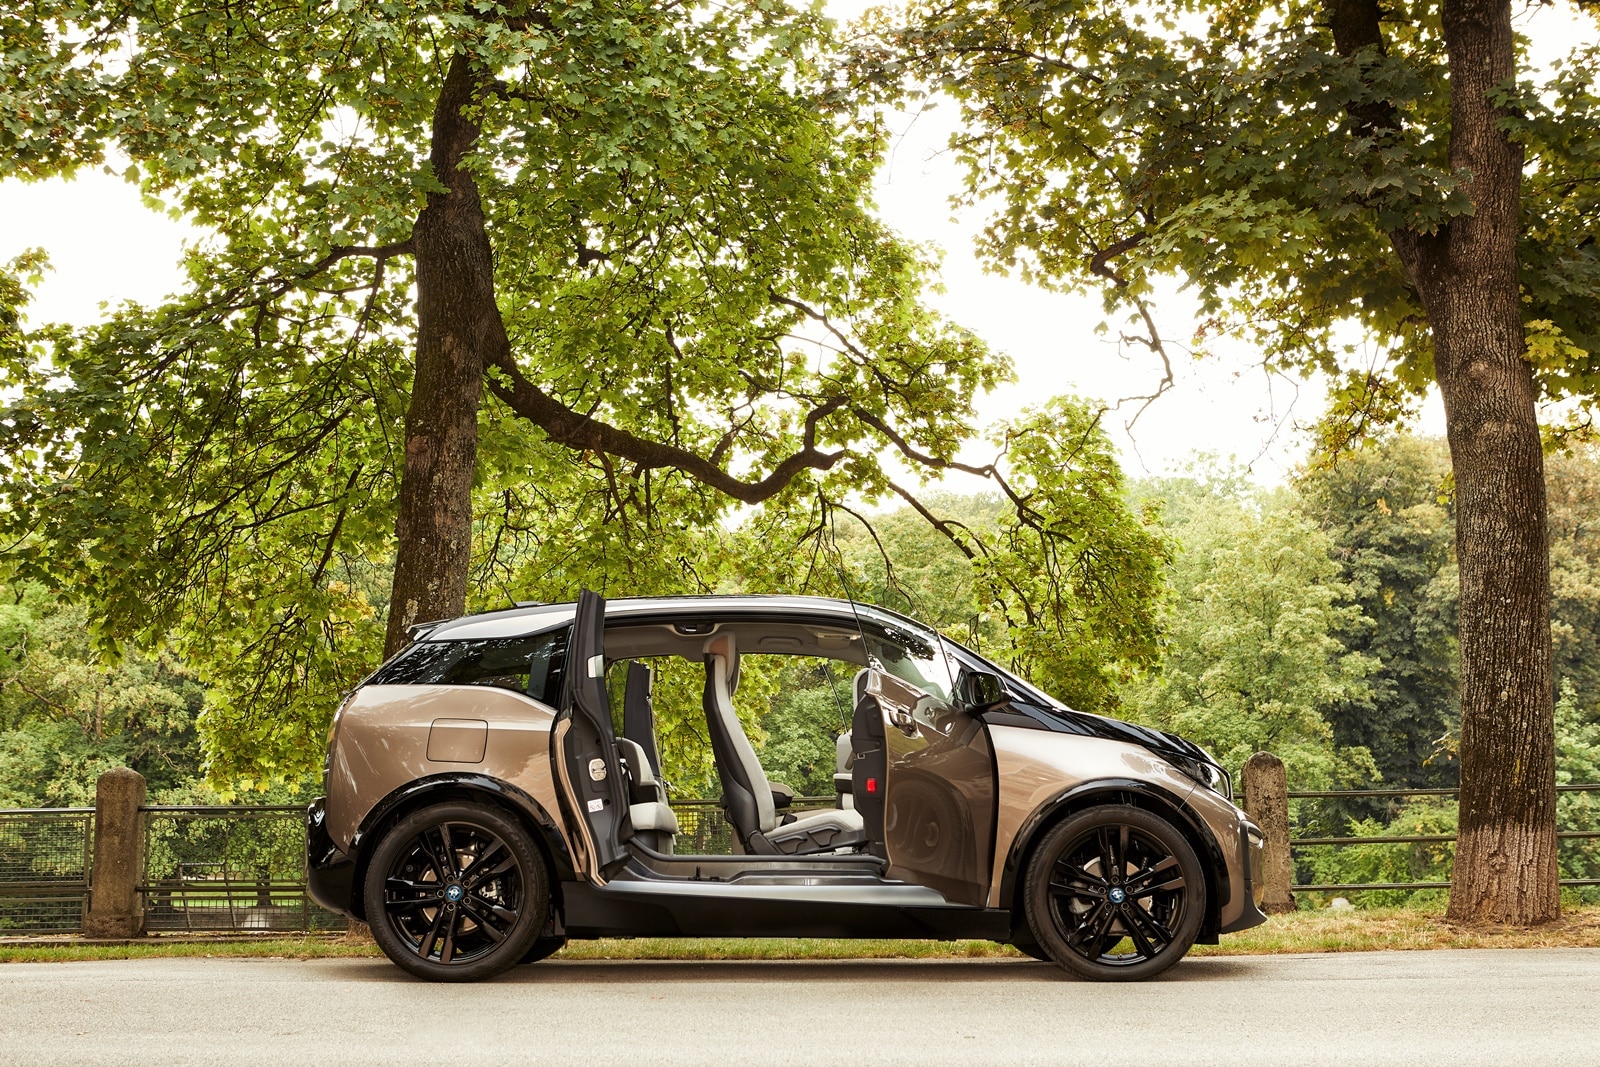 The electric BMW i3 will say goodbye this summer